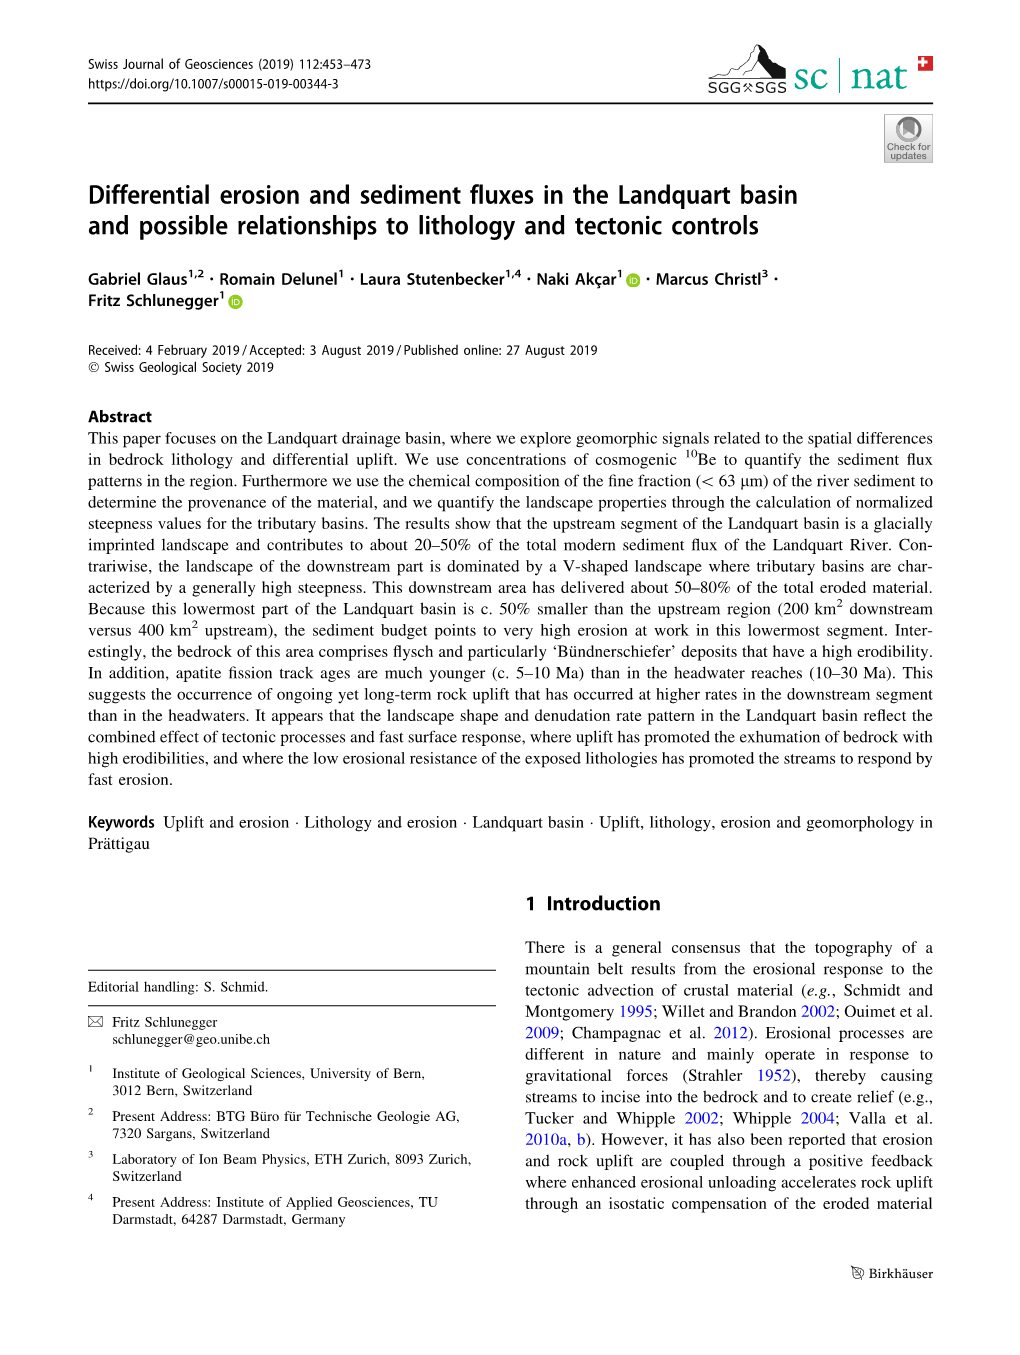 Differential Erosion and Sediment Fluxes in the Landquart Basin and Possible Relationships to Lithology and Tectonic Controls